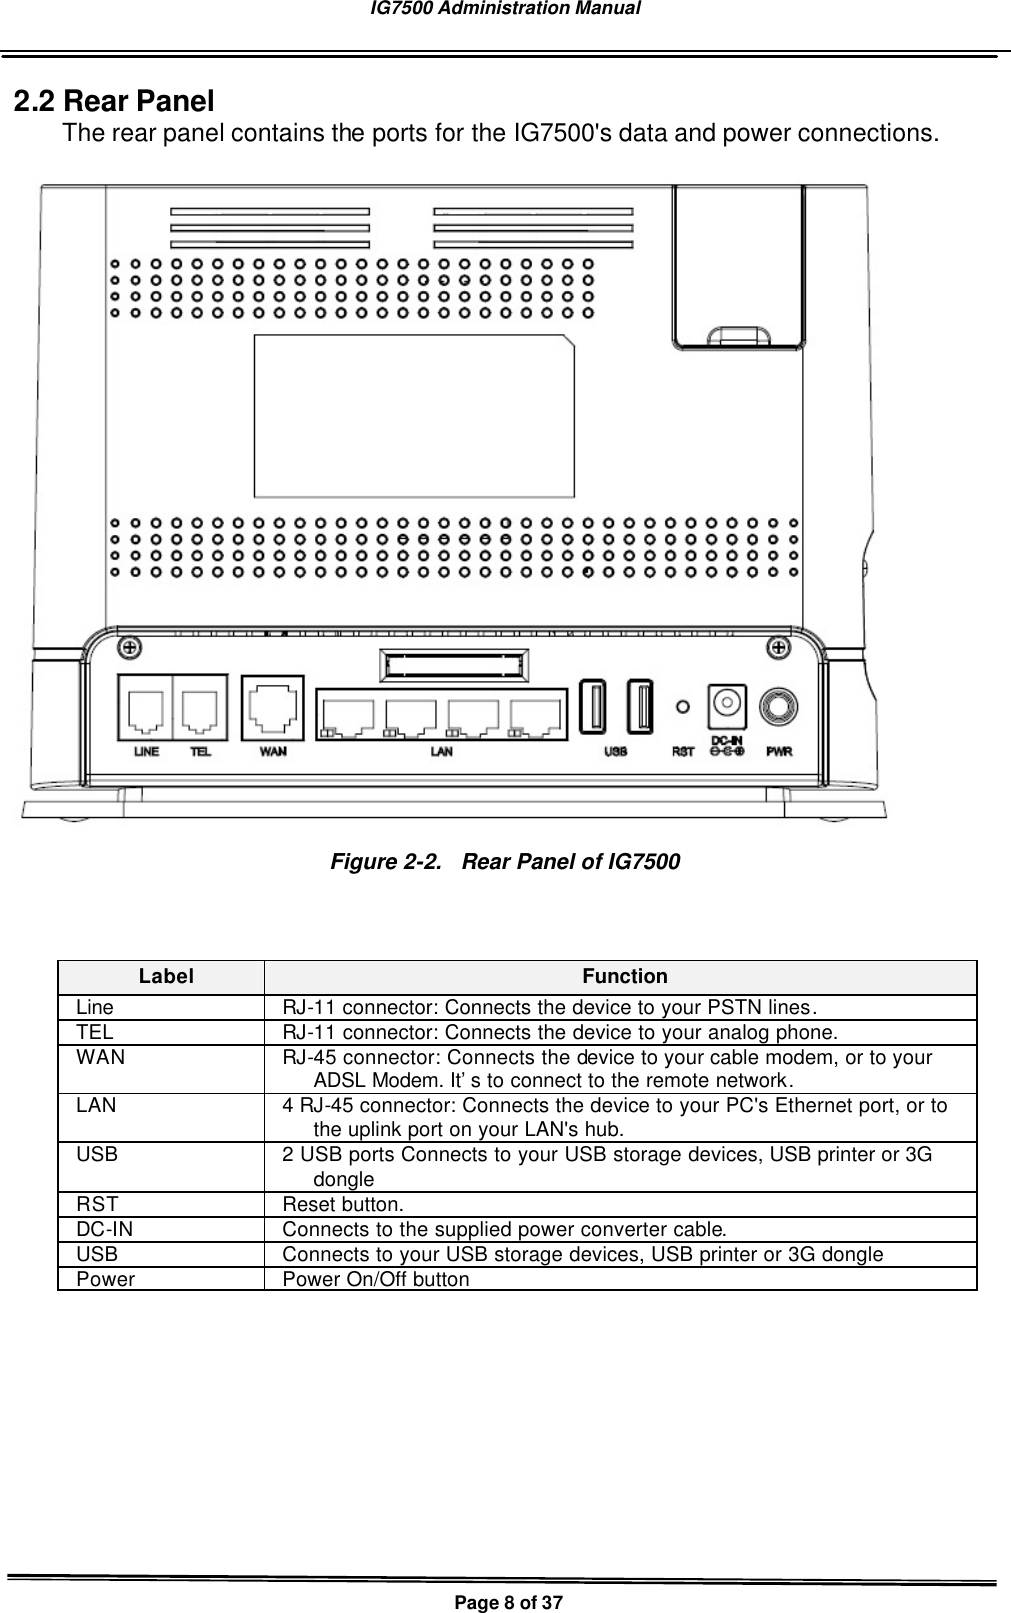 IG7500 Administration Manual   Page 8 of 37  2.2 Rear Panel The rear panel contains the ports for the IG7500&apos;s data and power connections.  Figure 2-2.  Rear Panel of IG7500   Label Function Line RJ-11 connector: Connects the device to your PSTN lines. TEL RJ-11 connector: Connects the device to your analog phone. WAN RJ-45 connector: Connects the device to your cable modem, or to your ADSL Modem. It’s to connect to the remote network. LAN 4 RJ-45 connector: Connects the device to your PC&apos;s Ethernet port, or to the uplink port on your LAN&apos;s hub. USB 2 USB ports Connects to your USB storage devices, USB printer or 3G dongle RST Reset button. DC-IN Connects to the supplied power converter cable. USB Connects to your USB storage devices, USB printer or 3G dongle Power Power On/Off button 